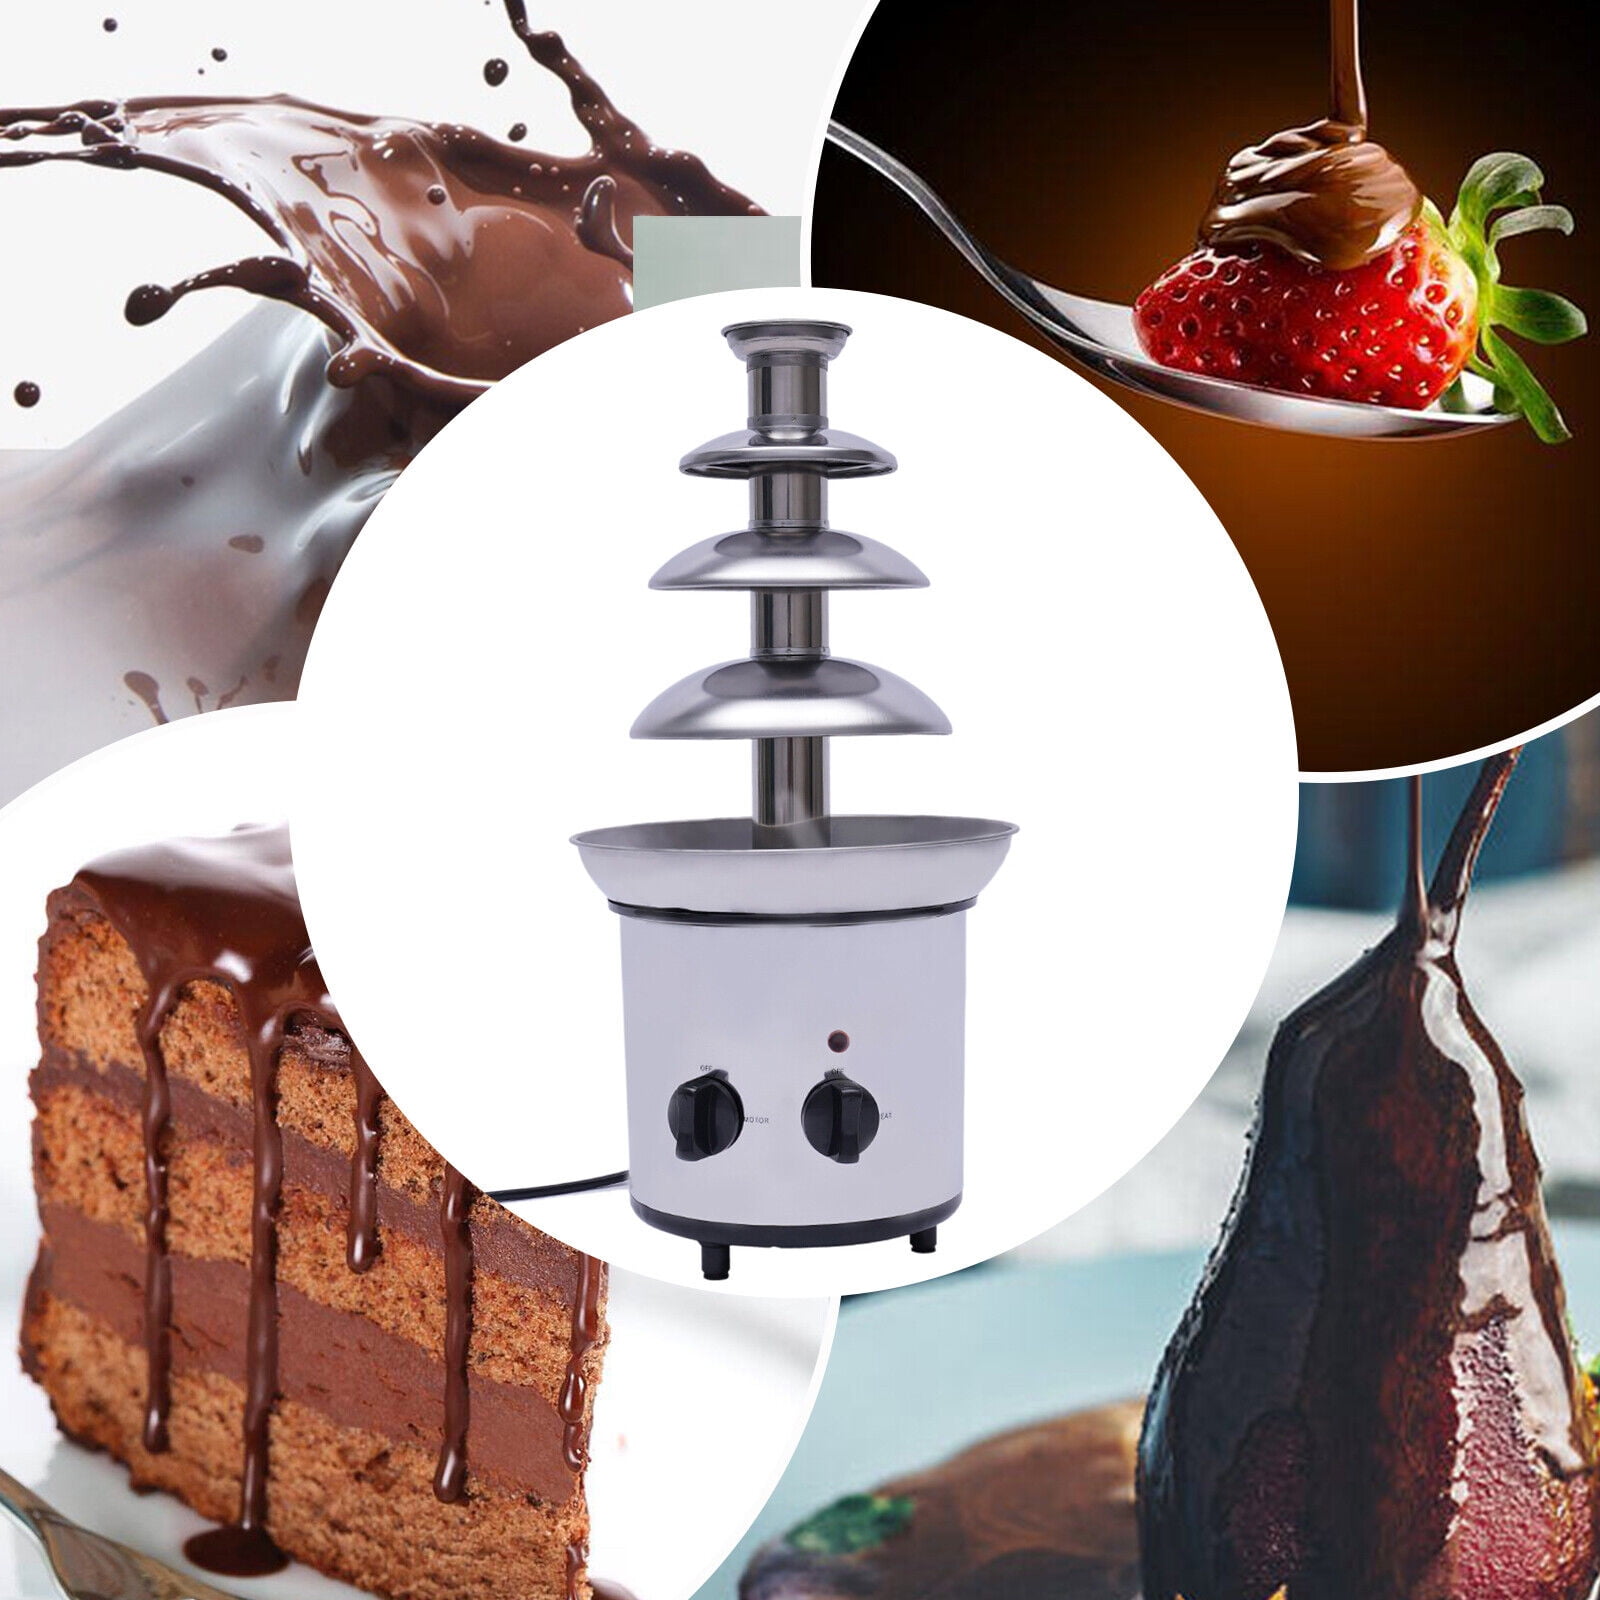 4 Tier Stainless Steel Commercial Chocolate Fondue Fountain 110V/50hz 170W 